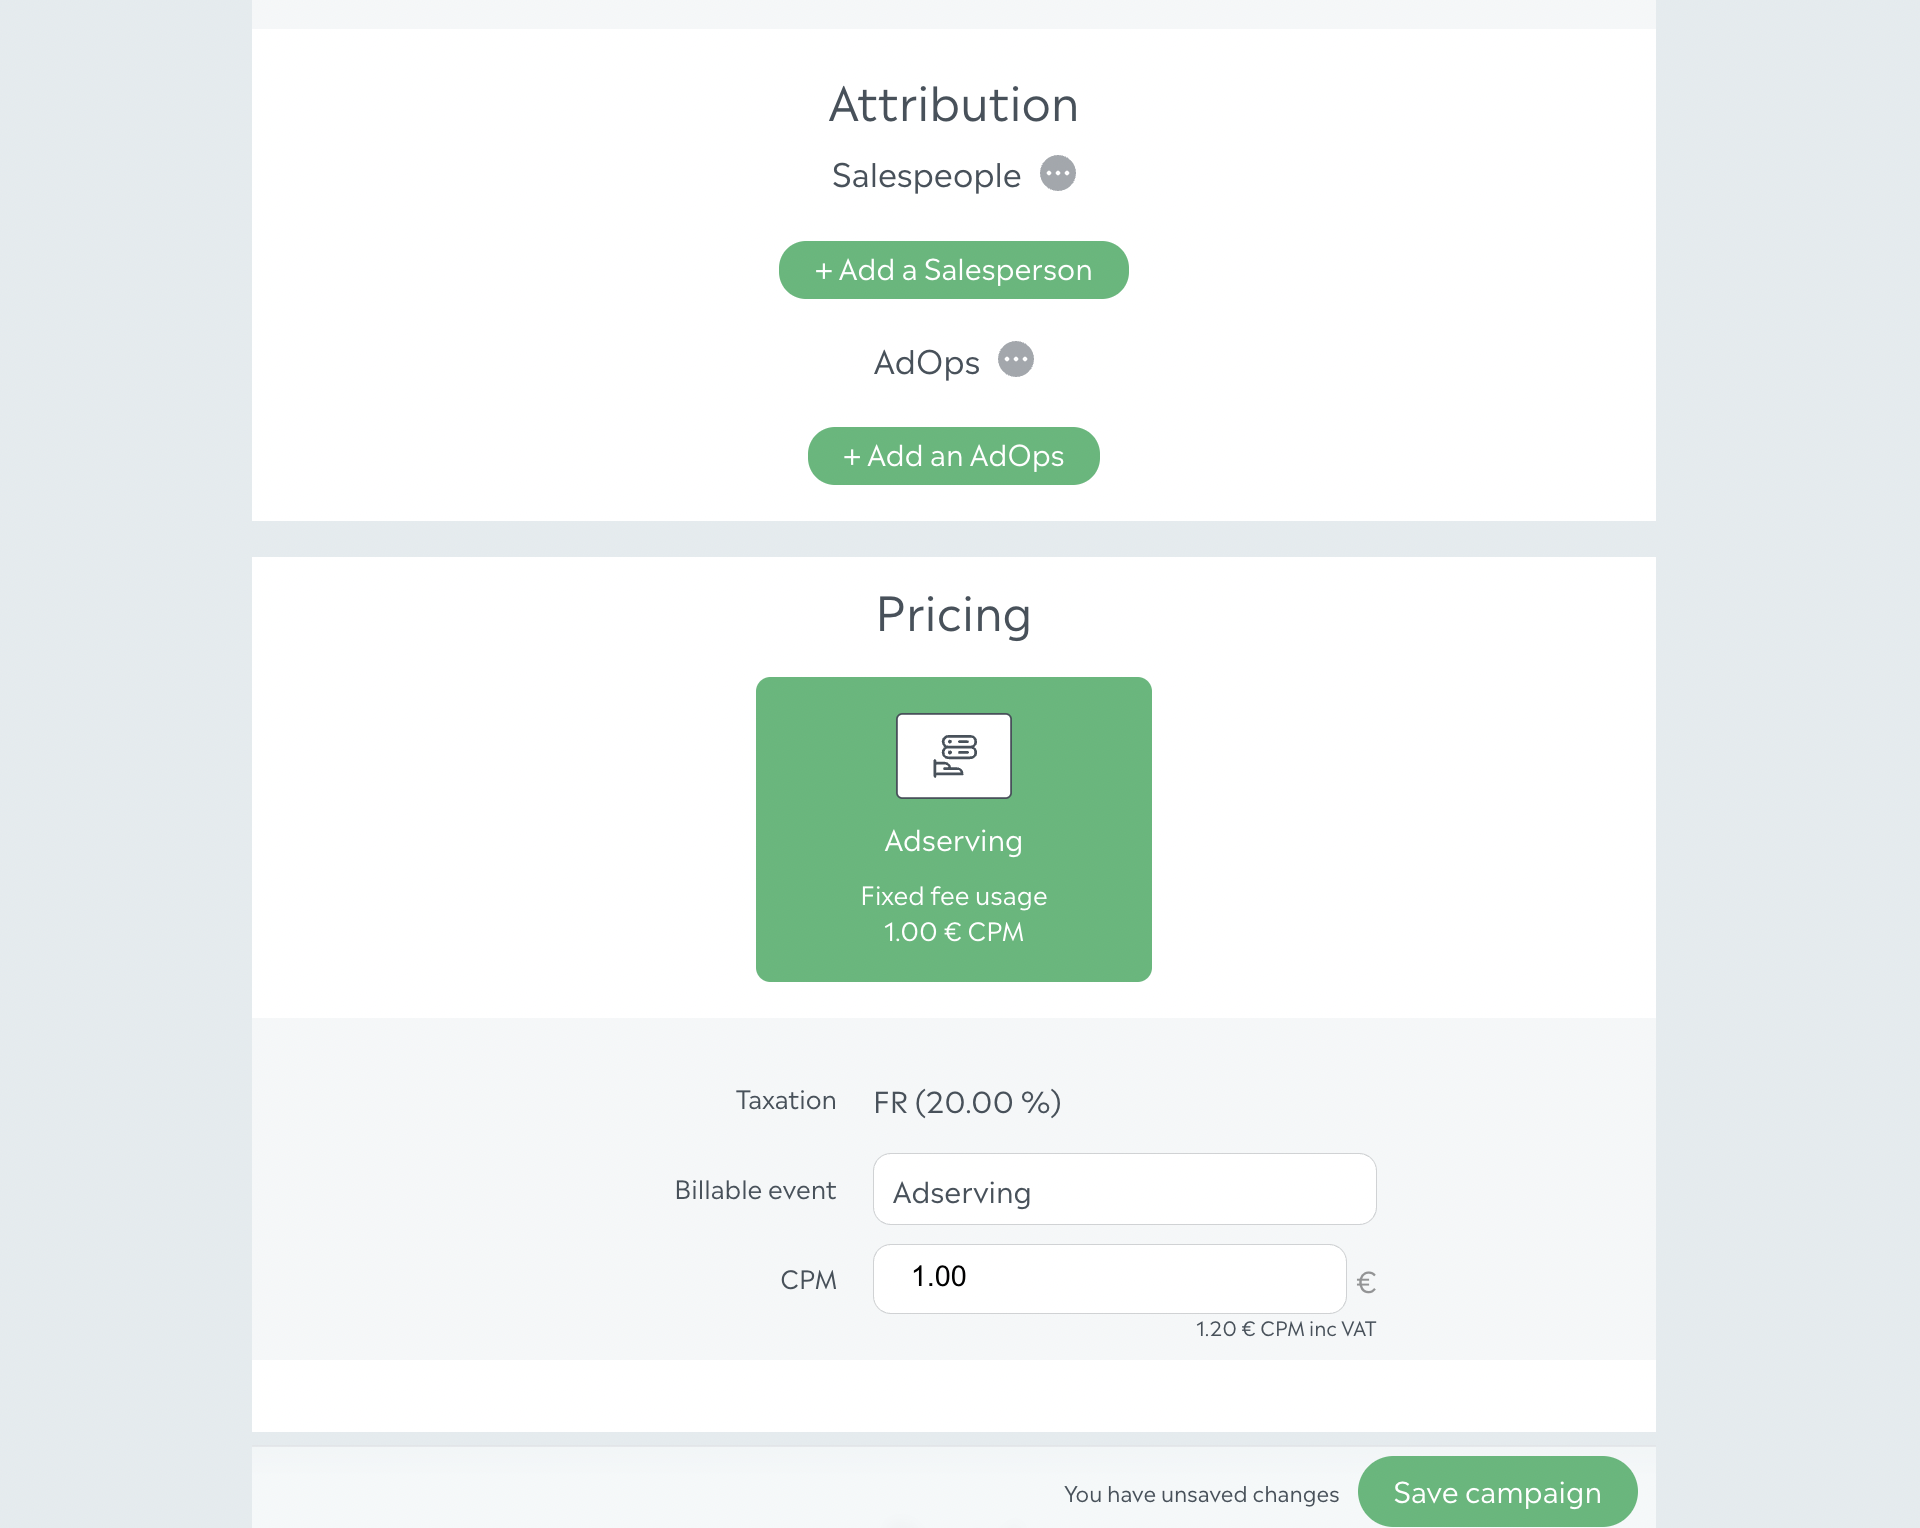 Attribution and Pricing